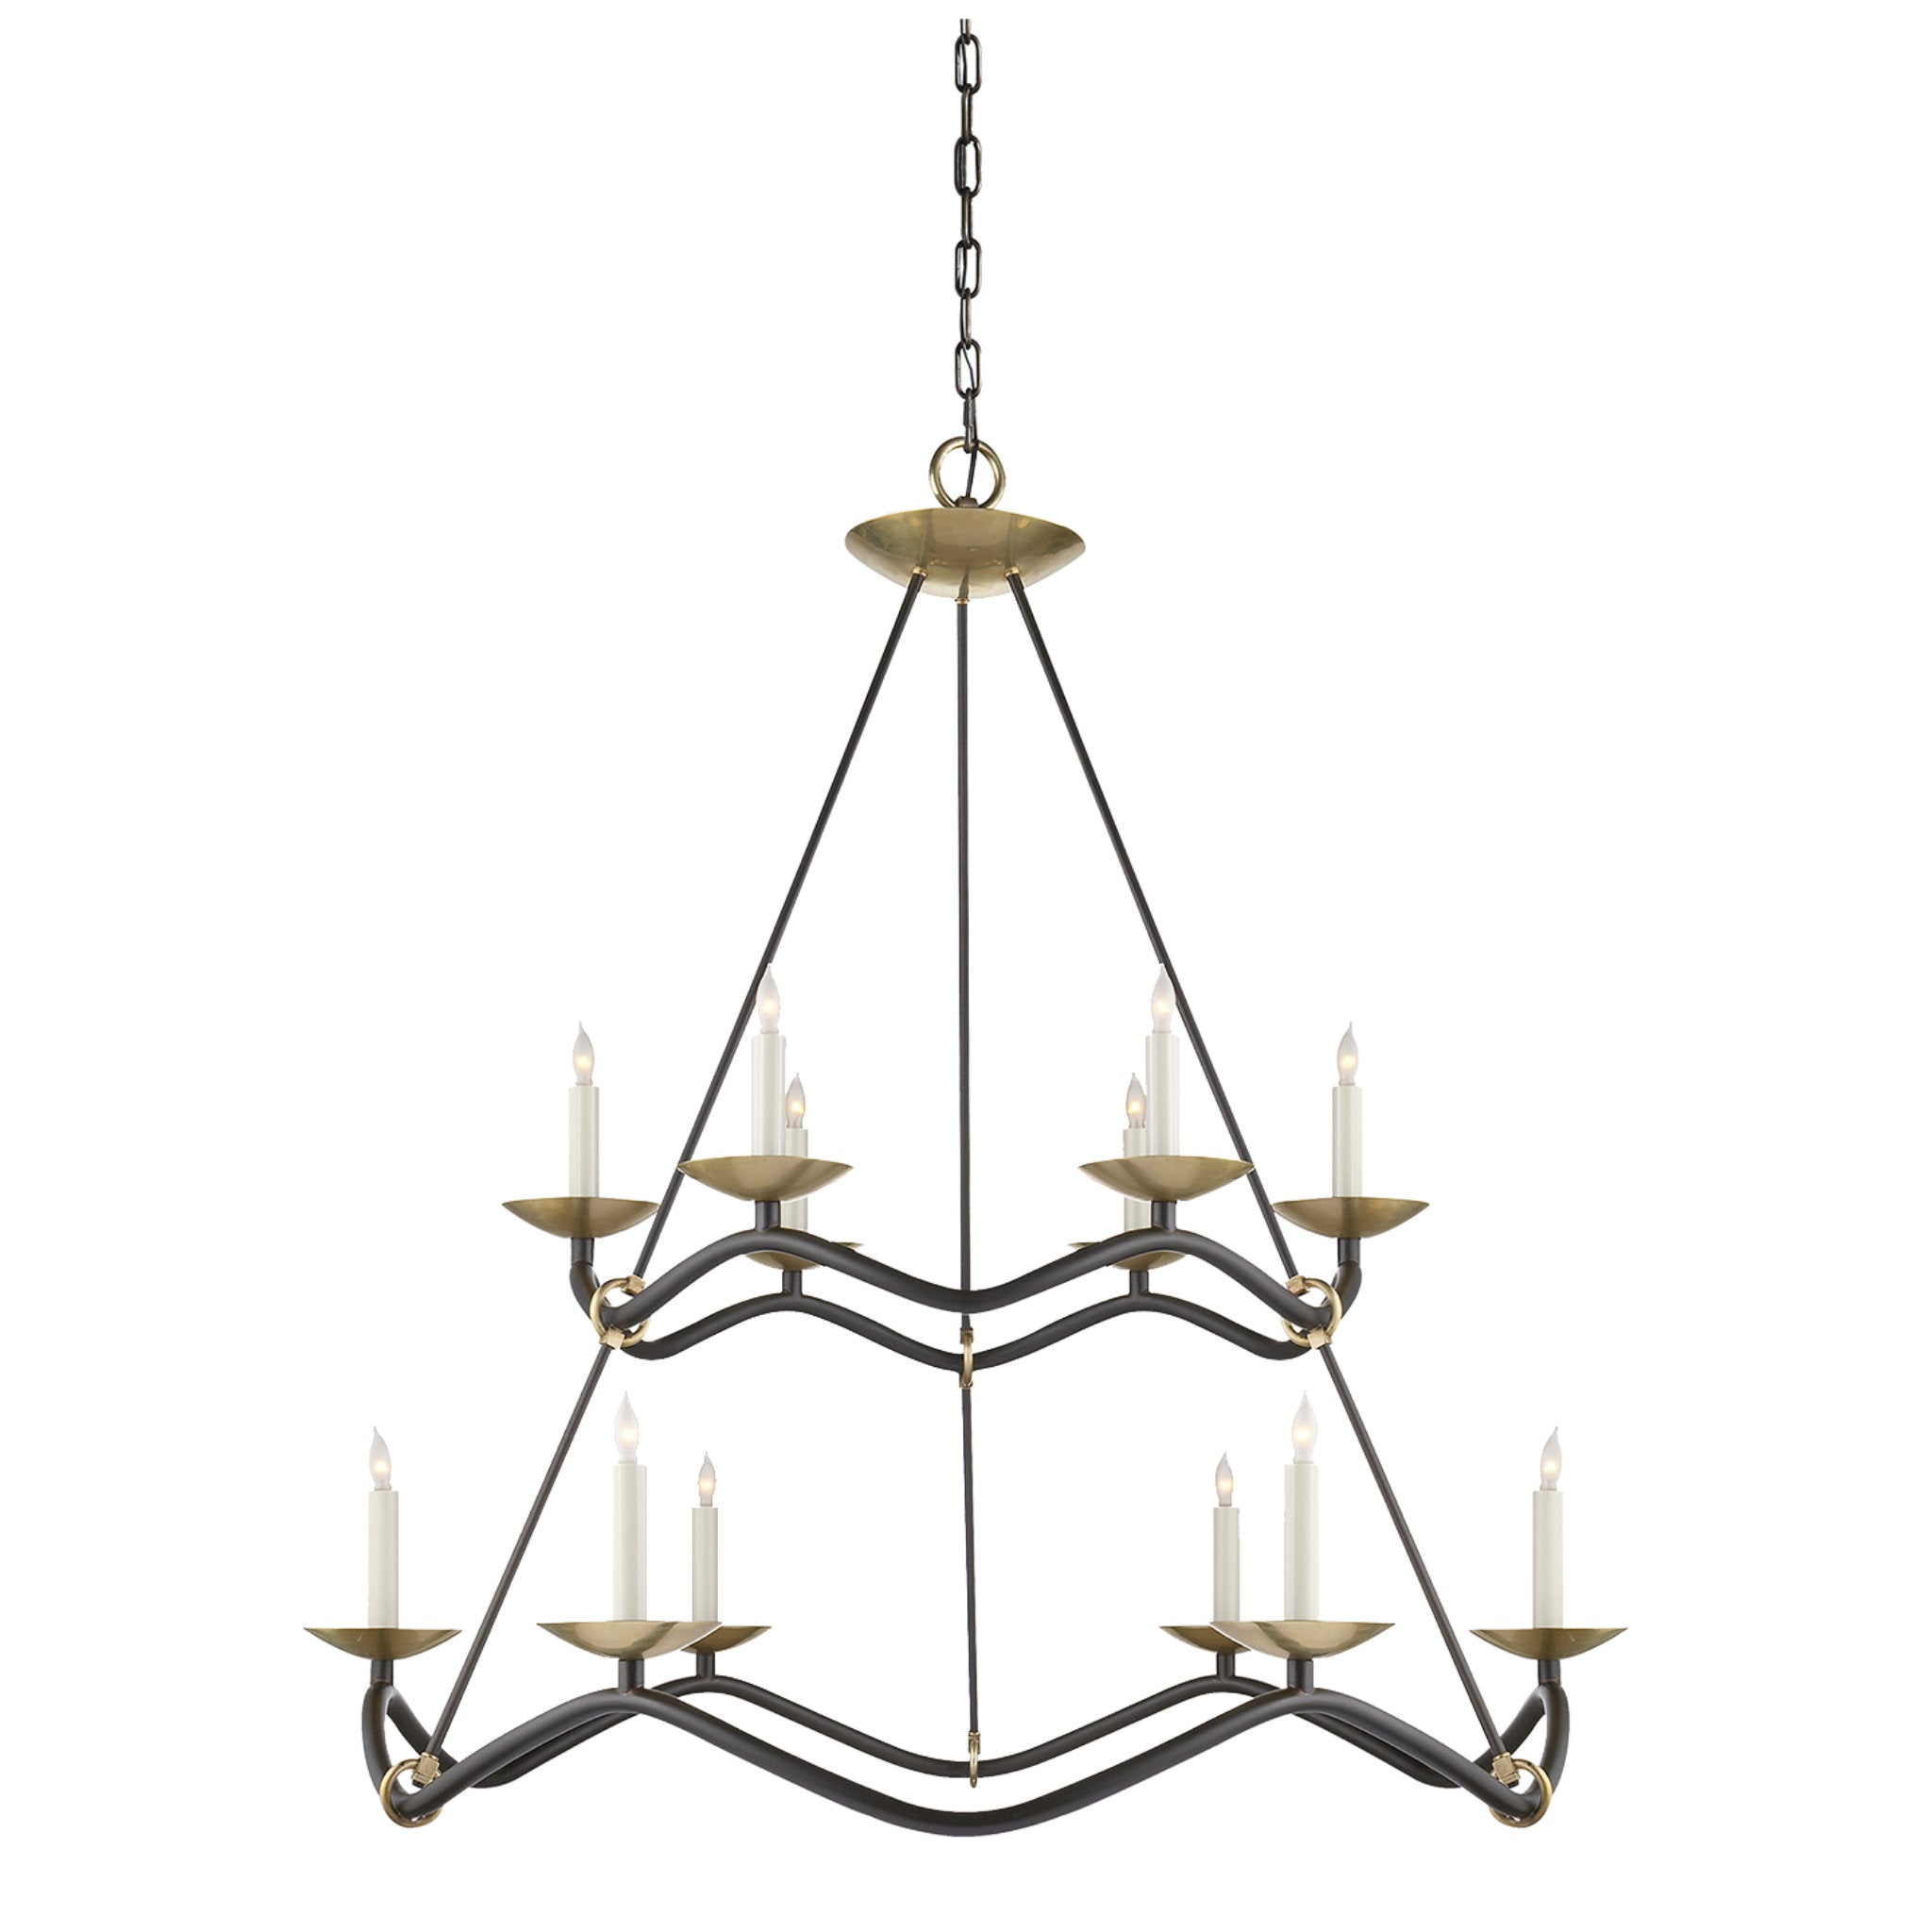 Barry Goralnick Choros Two-Tier Chandelier in Aged Iron